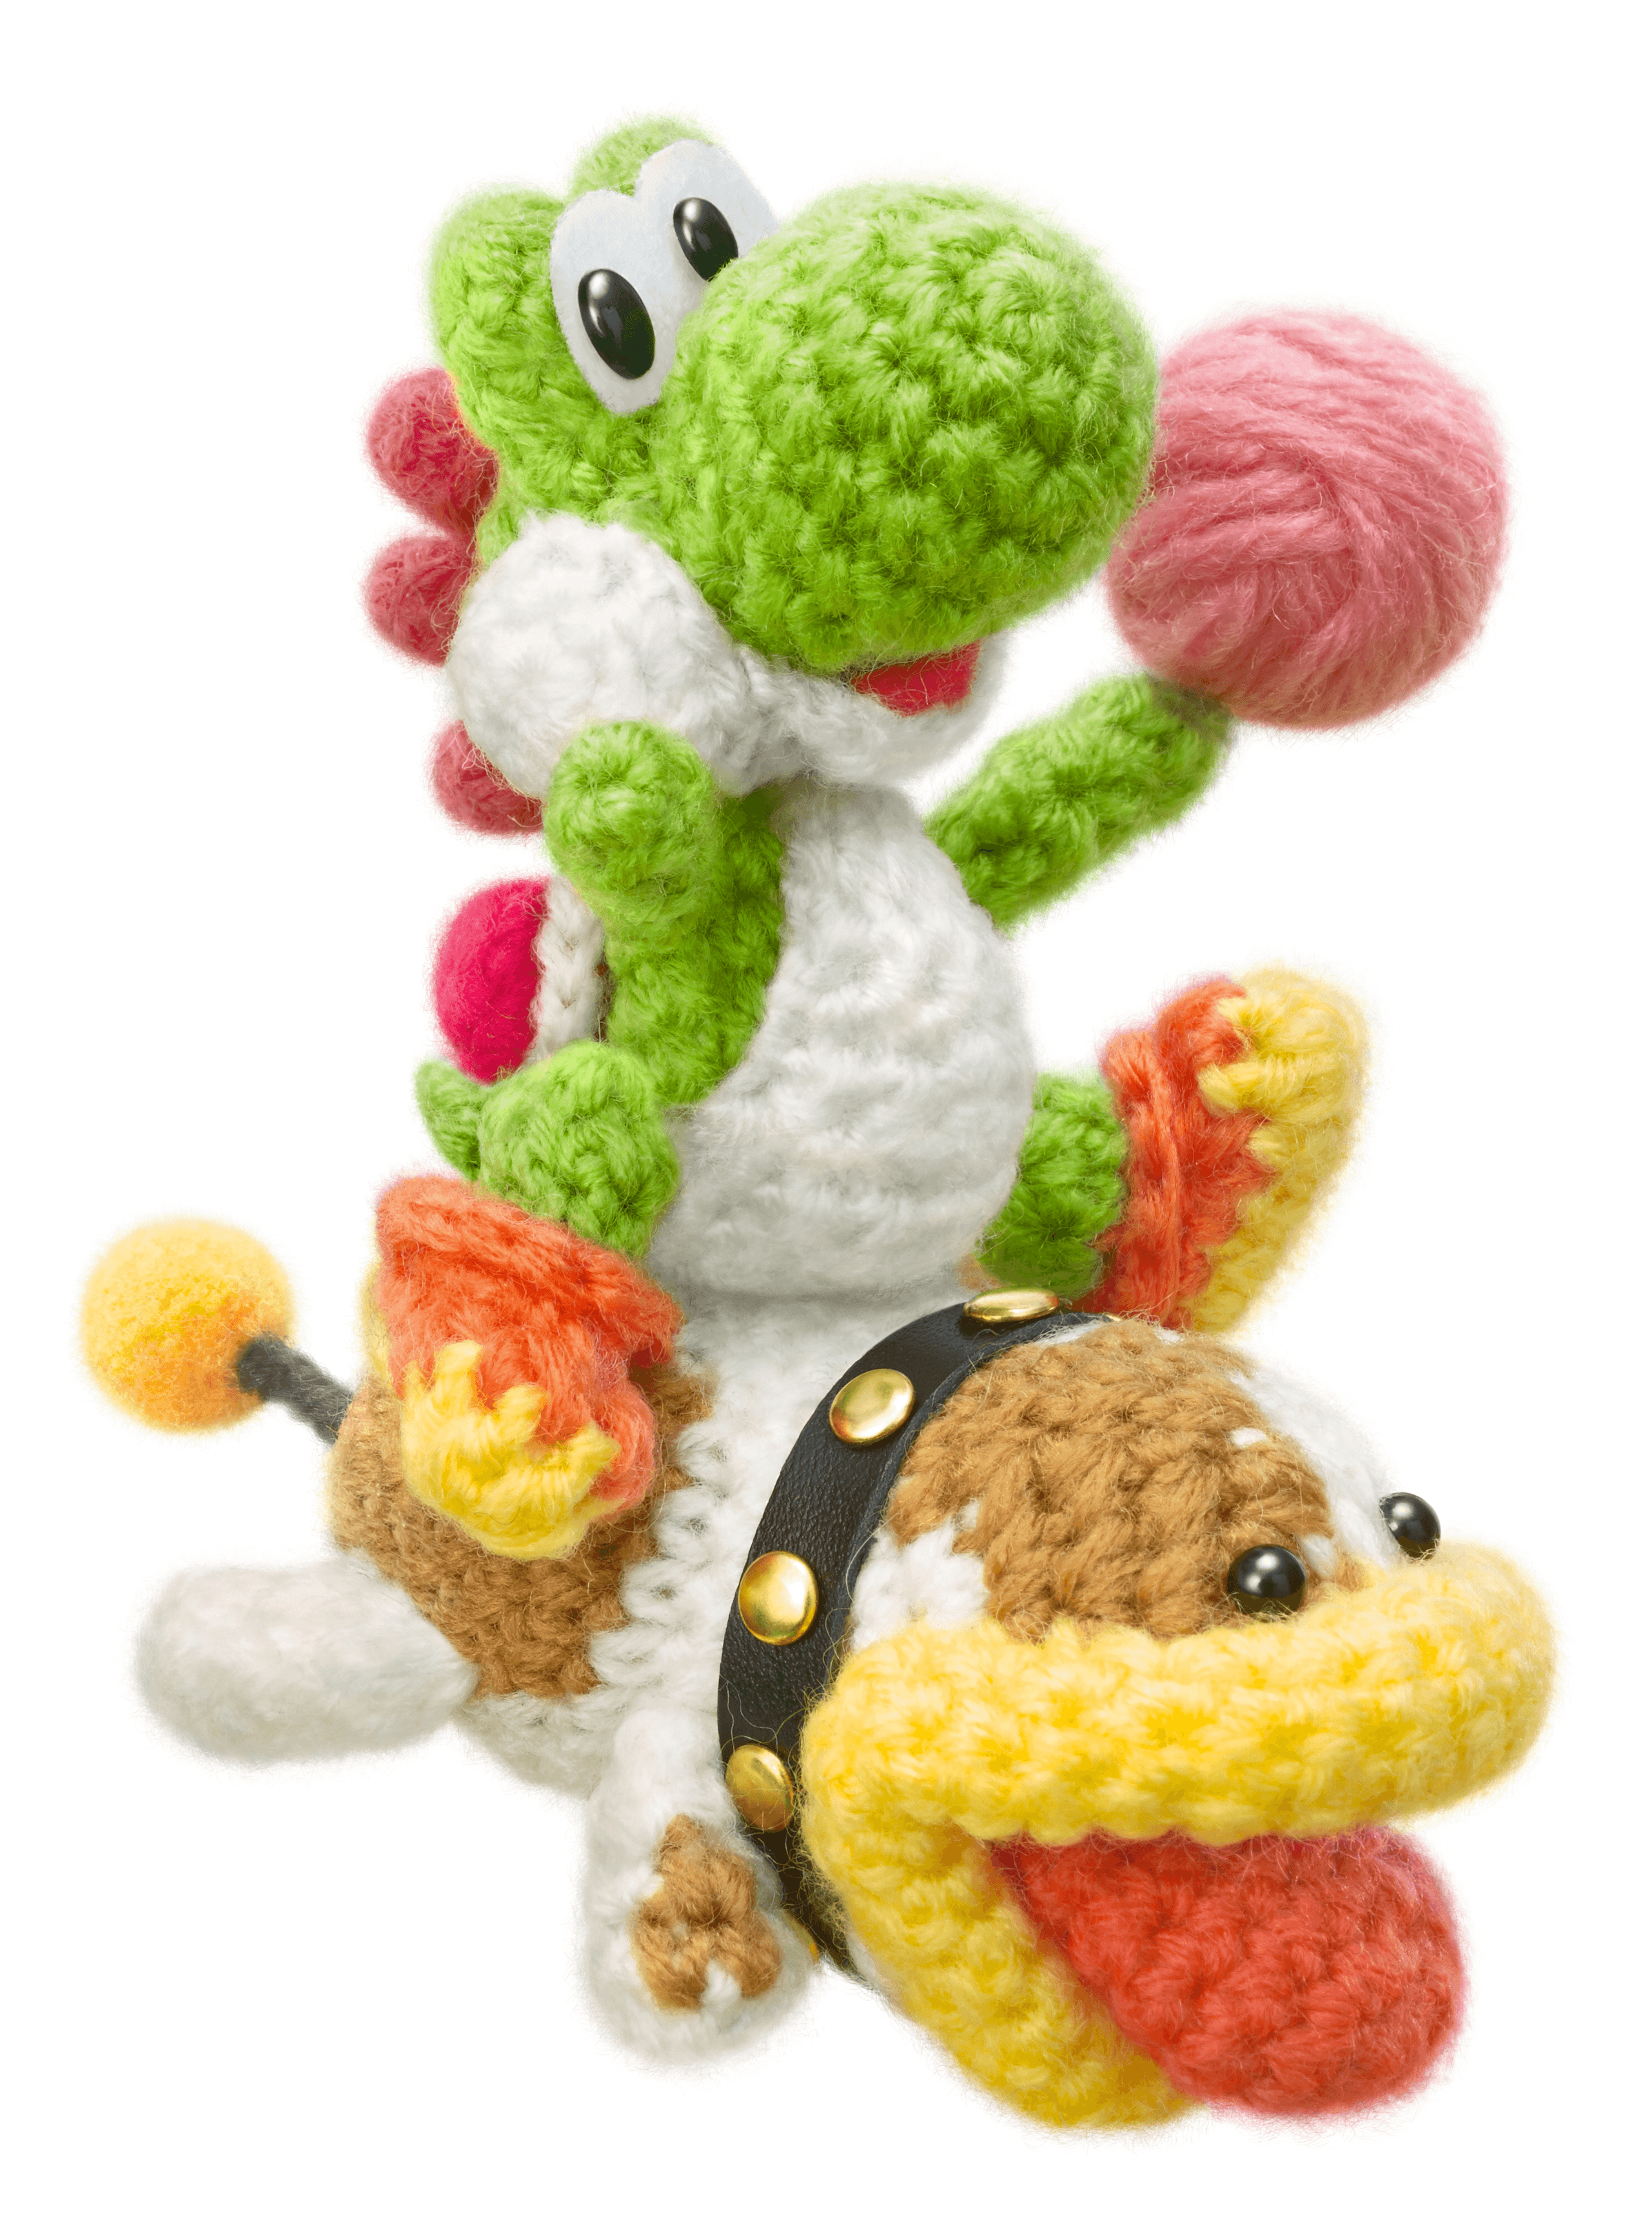 Poochy image Poochy and Yoshi HD wallpaper and background photo